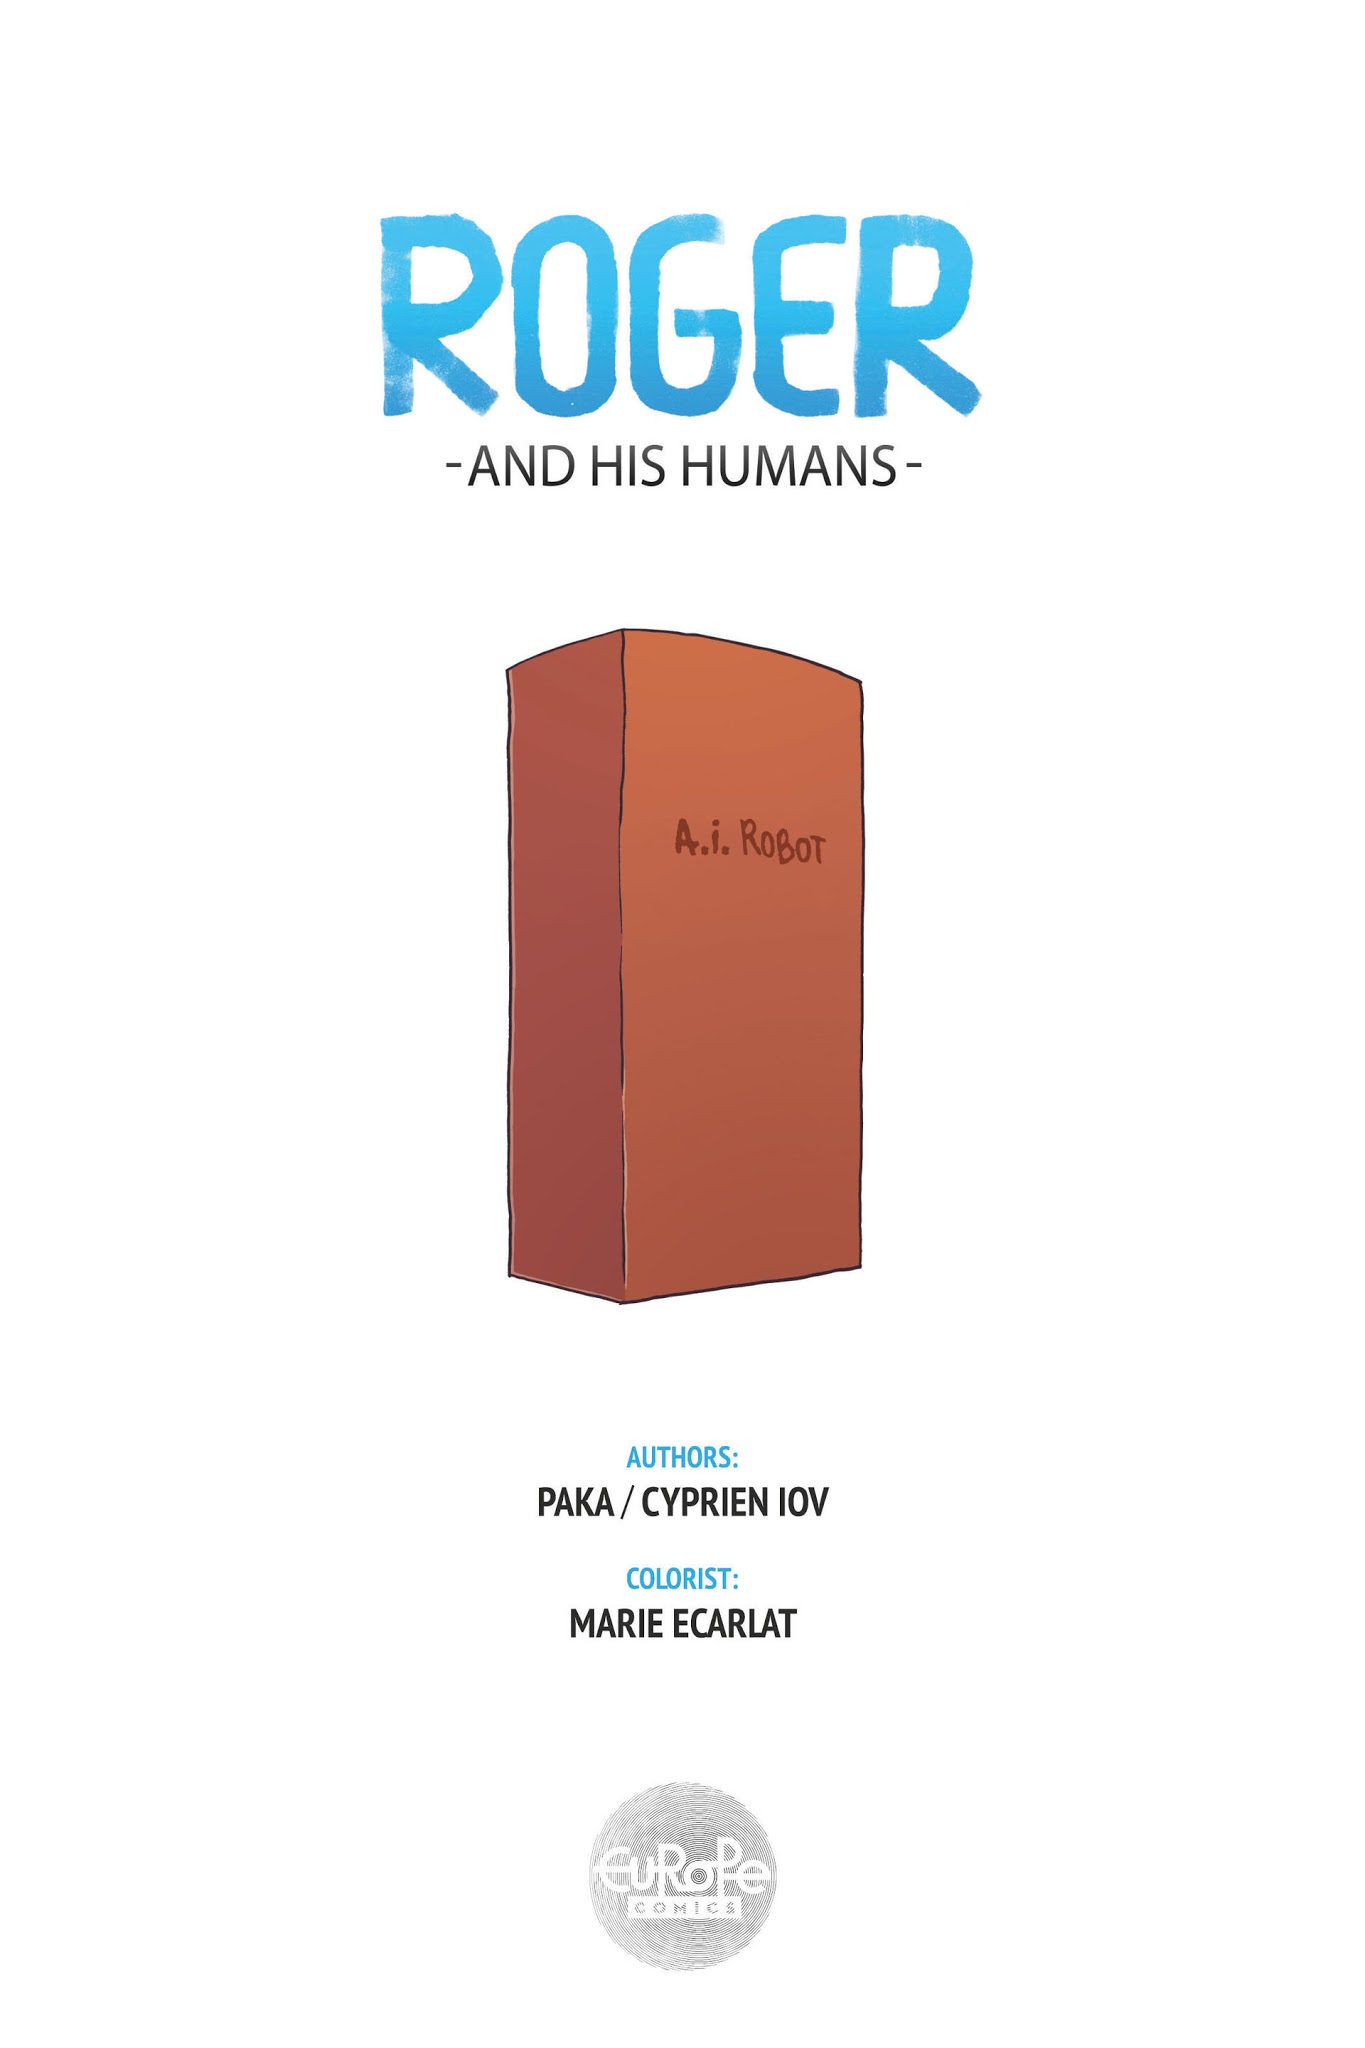 Read online Roger and His Humans comic -  Issue #1 - 3